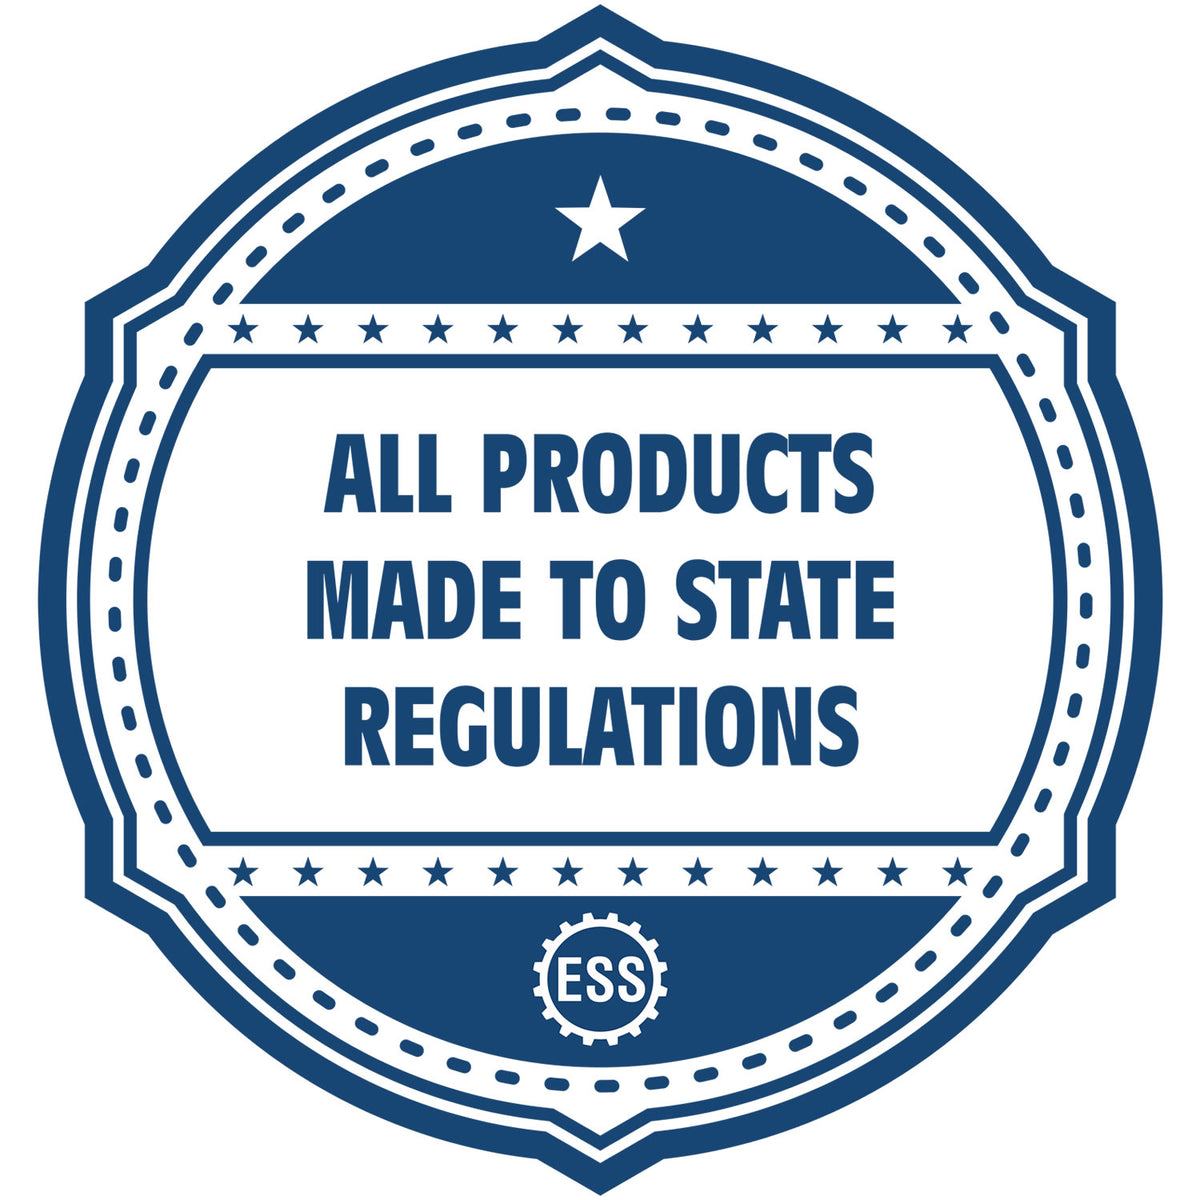 An icon or badge element for the Alaska Desk Surveyor Seal Embosser showing that this product is made in compliance with state regulations.